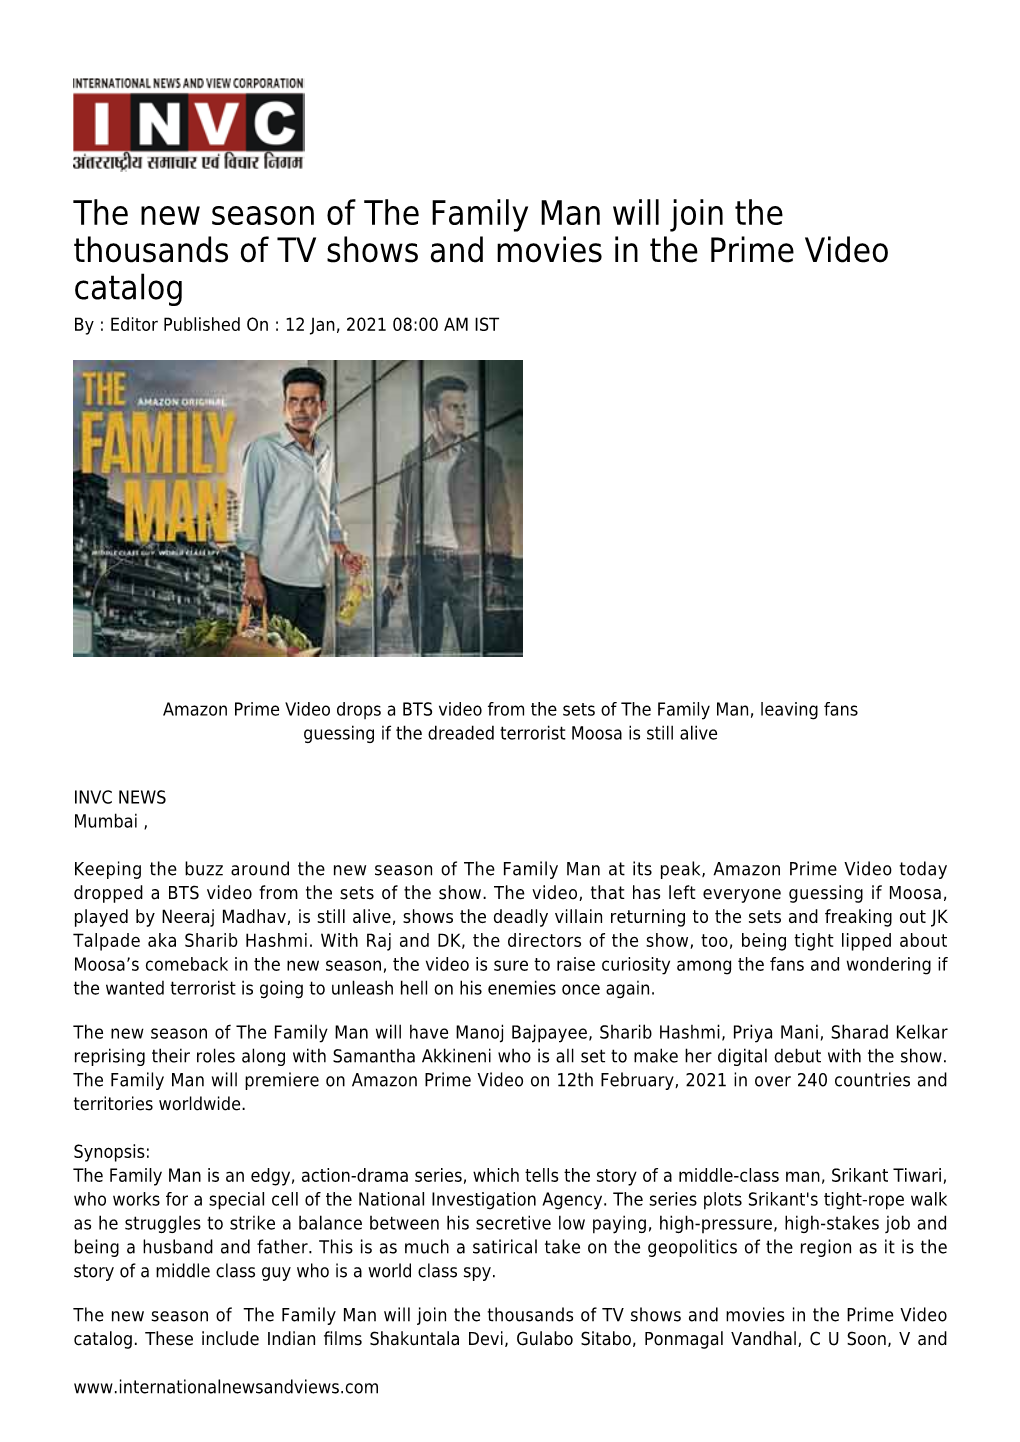 The New Season of the Family Man Will Join the Thousands of TV Shows and Movies in the Prime Video Catalog by : Editor Published on : 12 Jan, 2021 08:00 AM IST